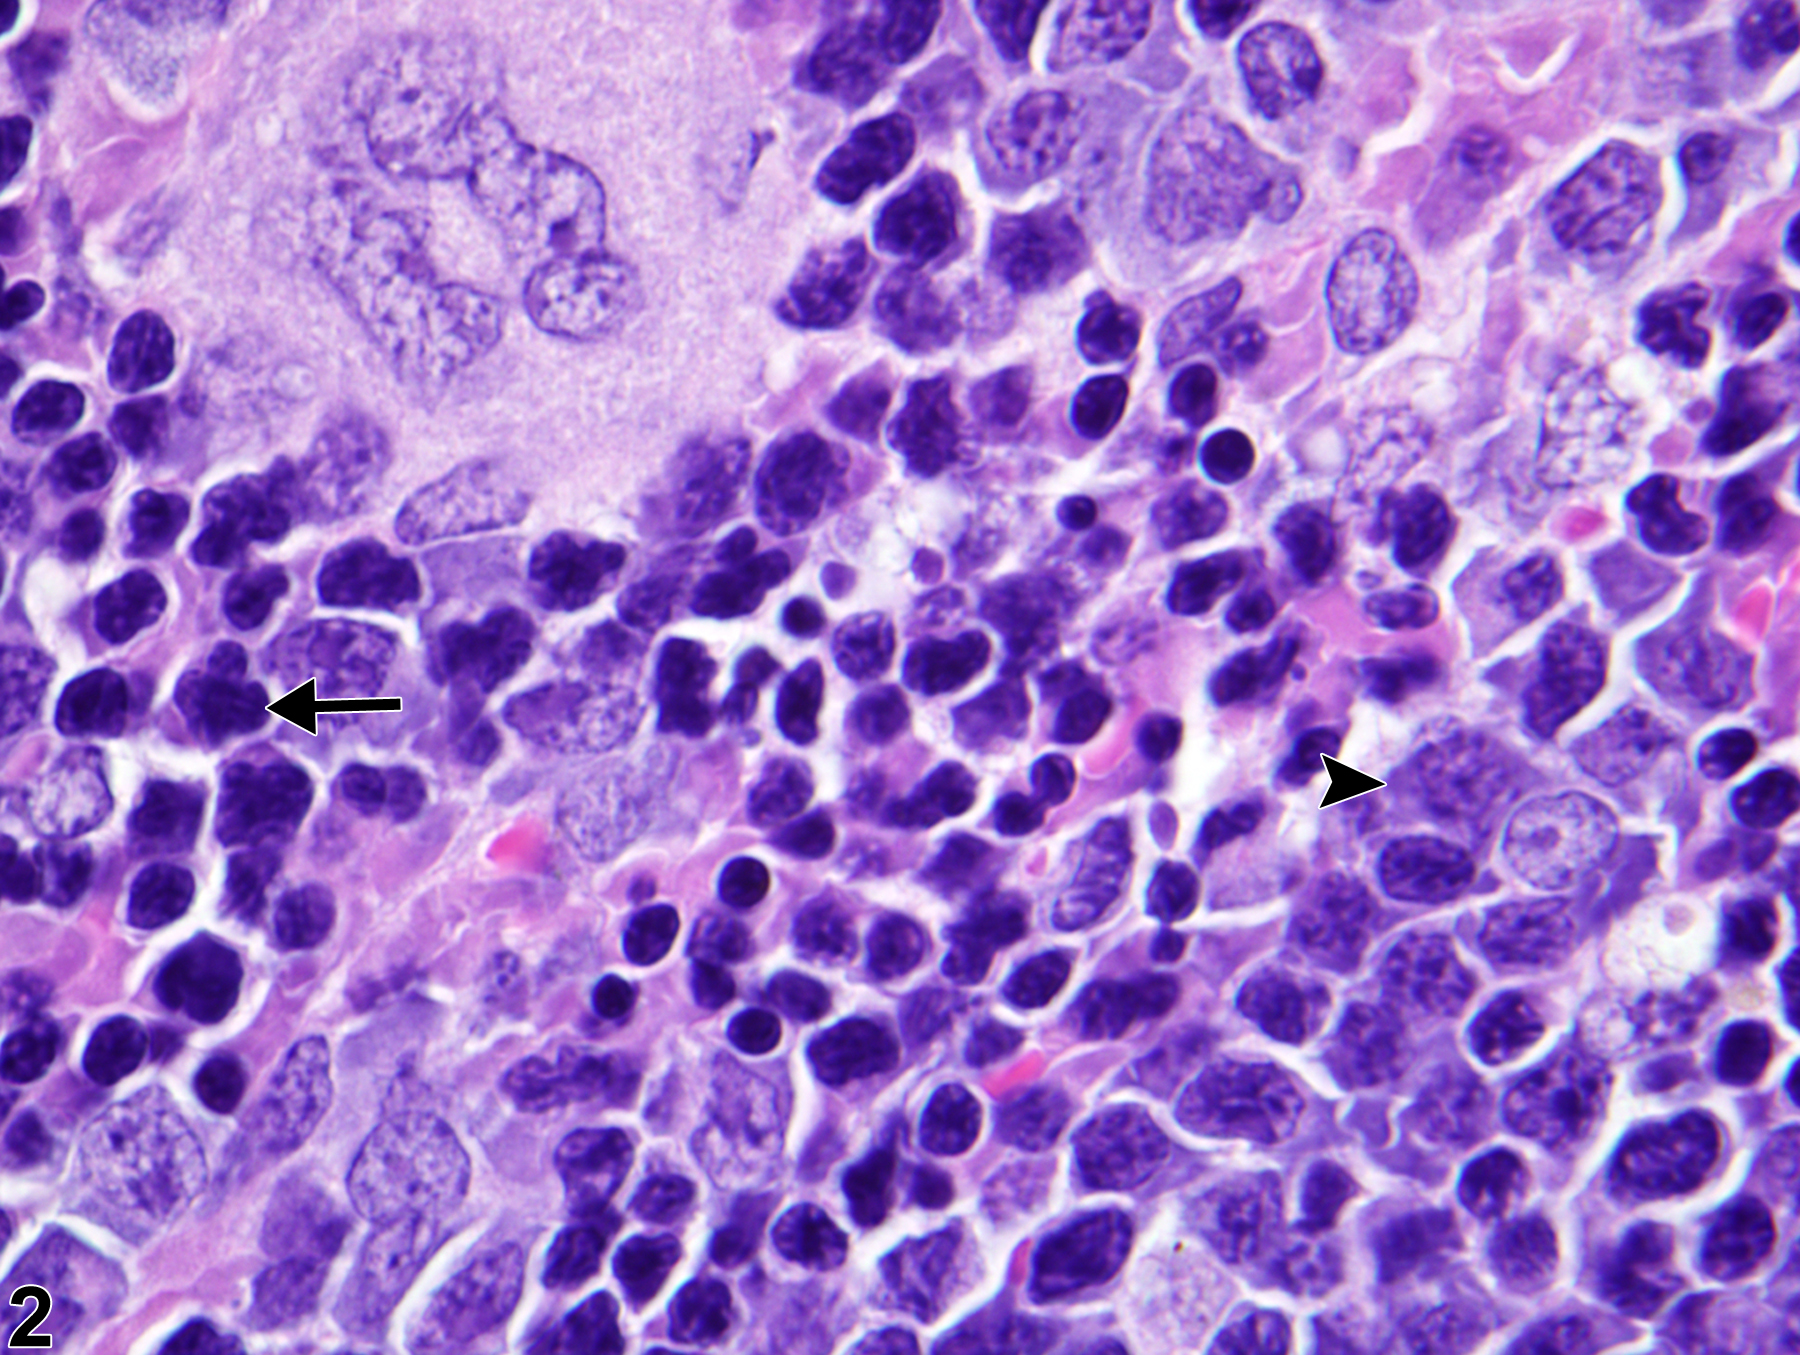 Image of extramedullary hematopoiesis in the spleen from a male B6C3F1/N mouse in a chronic study